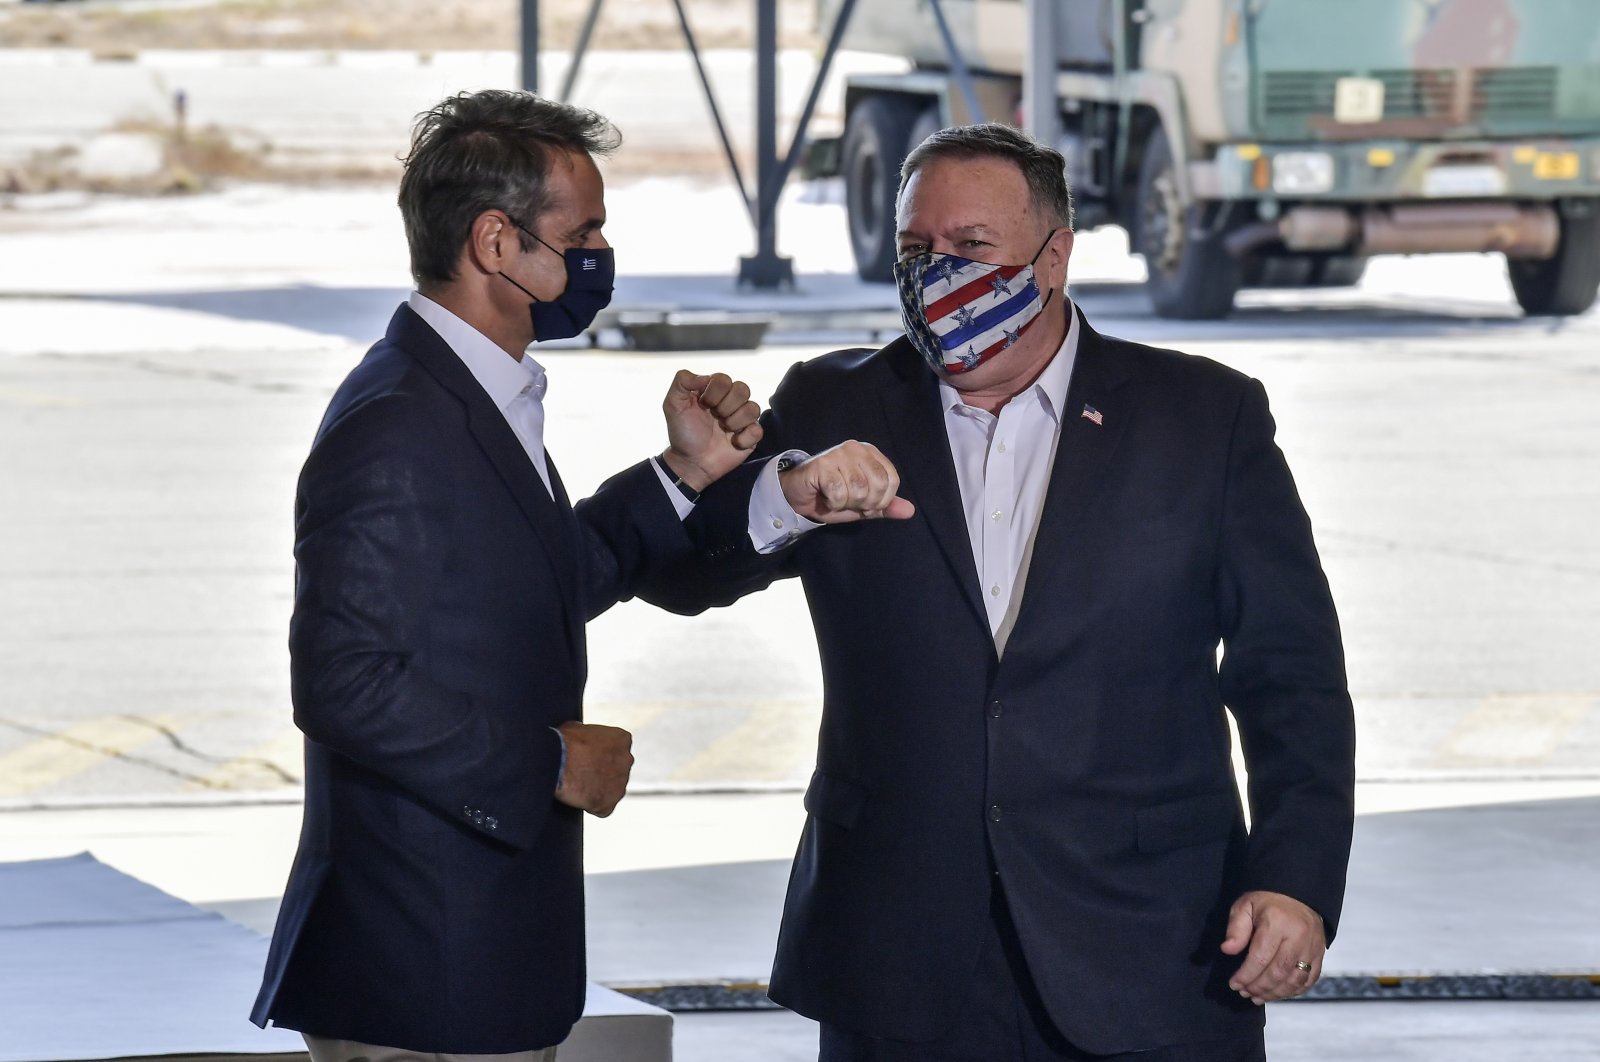 U.S. Secretary of State Mike Pompeo, right, and Greek Prime Minister Kyriakos Mitsotakis pose during their visit at the Naval Support Activity base at Souda, on the Greek island of Crete, Tuesday, Sept. 29, 2020. (AP Photo)